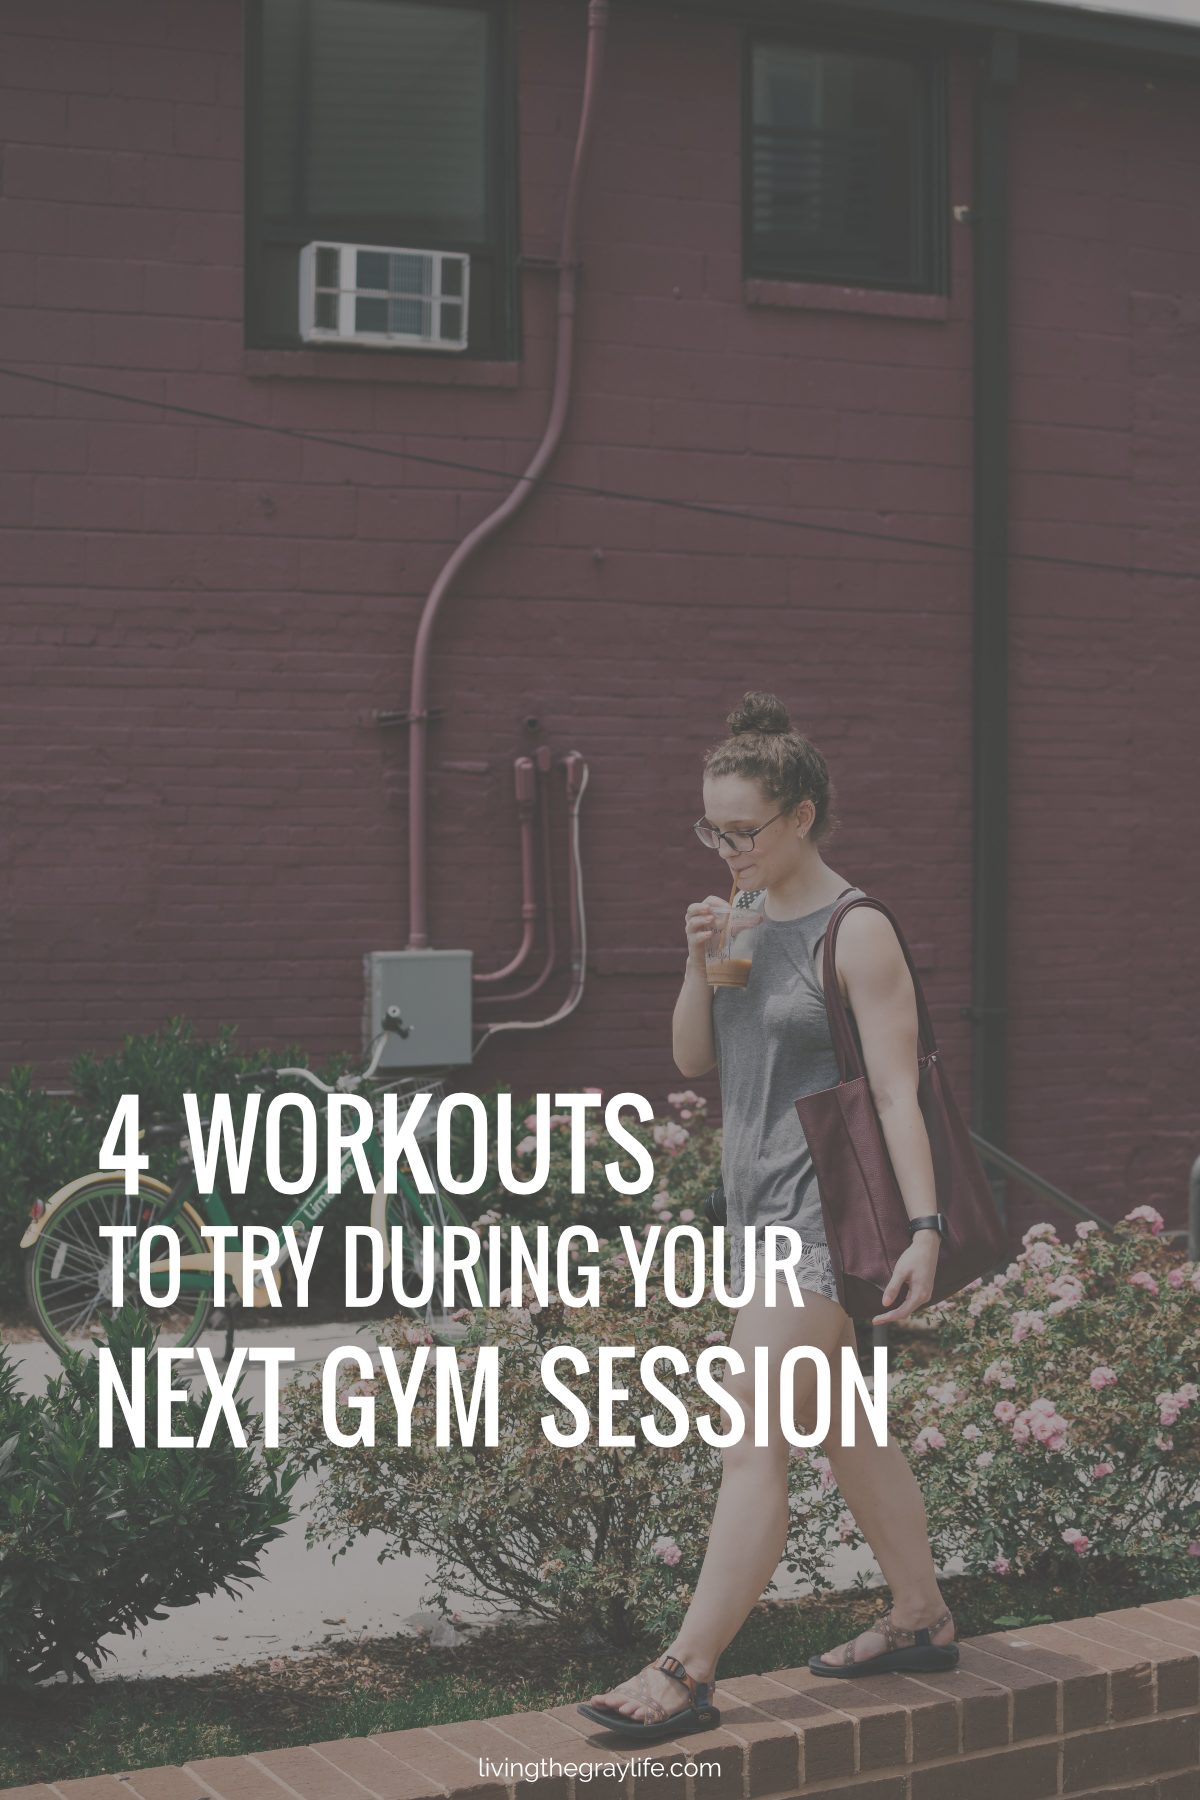 4 Workouts to try During Your Next Gym Session